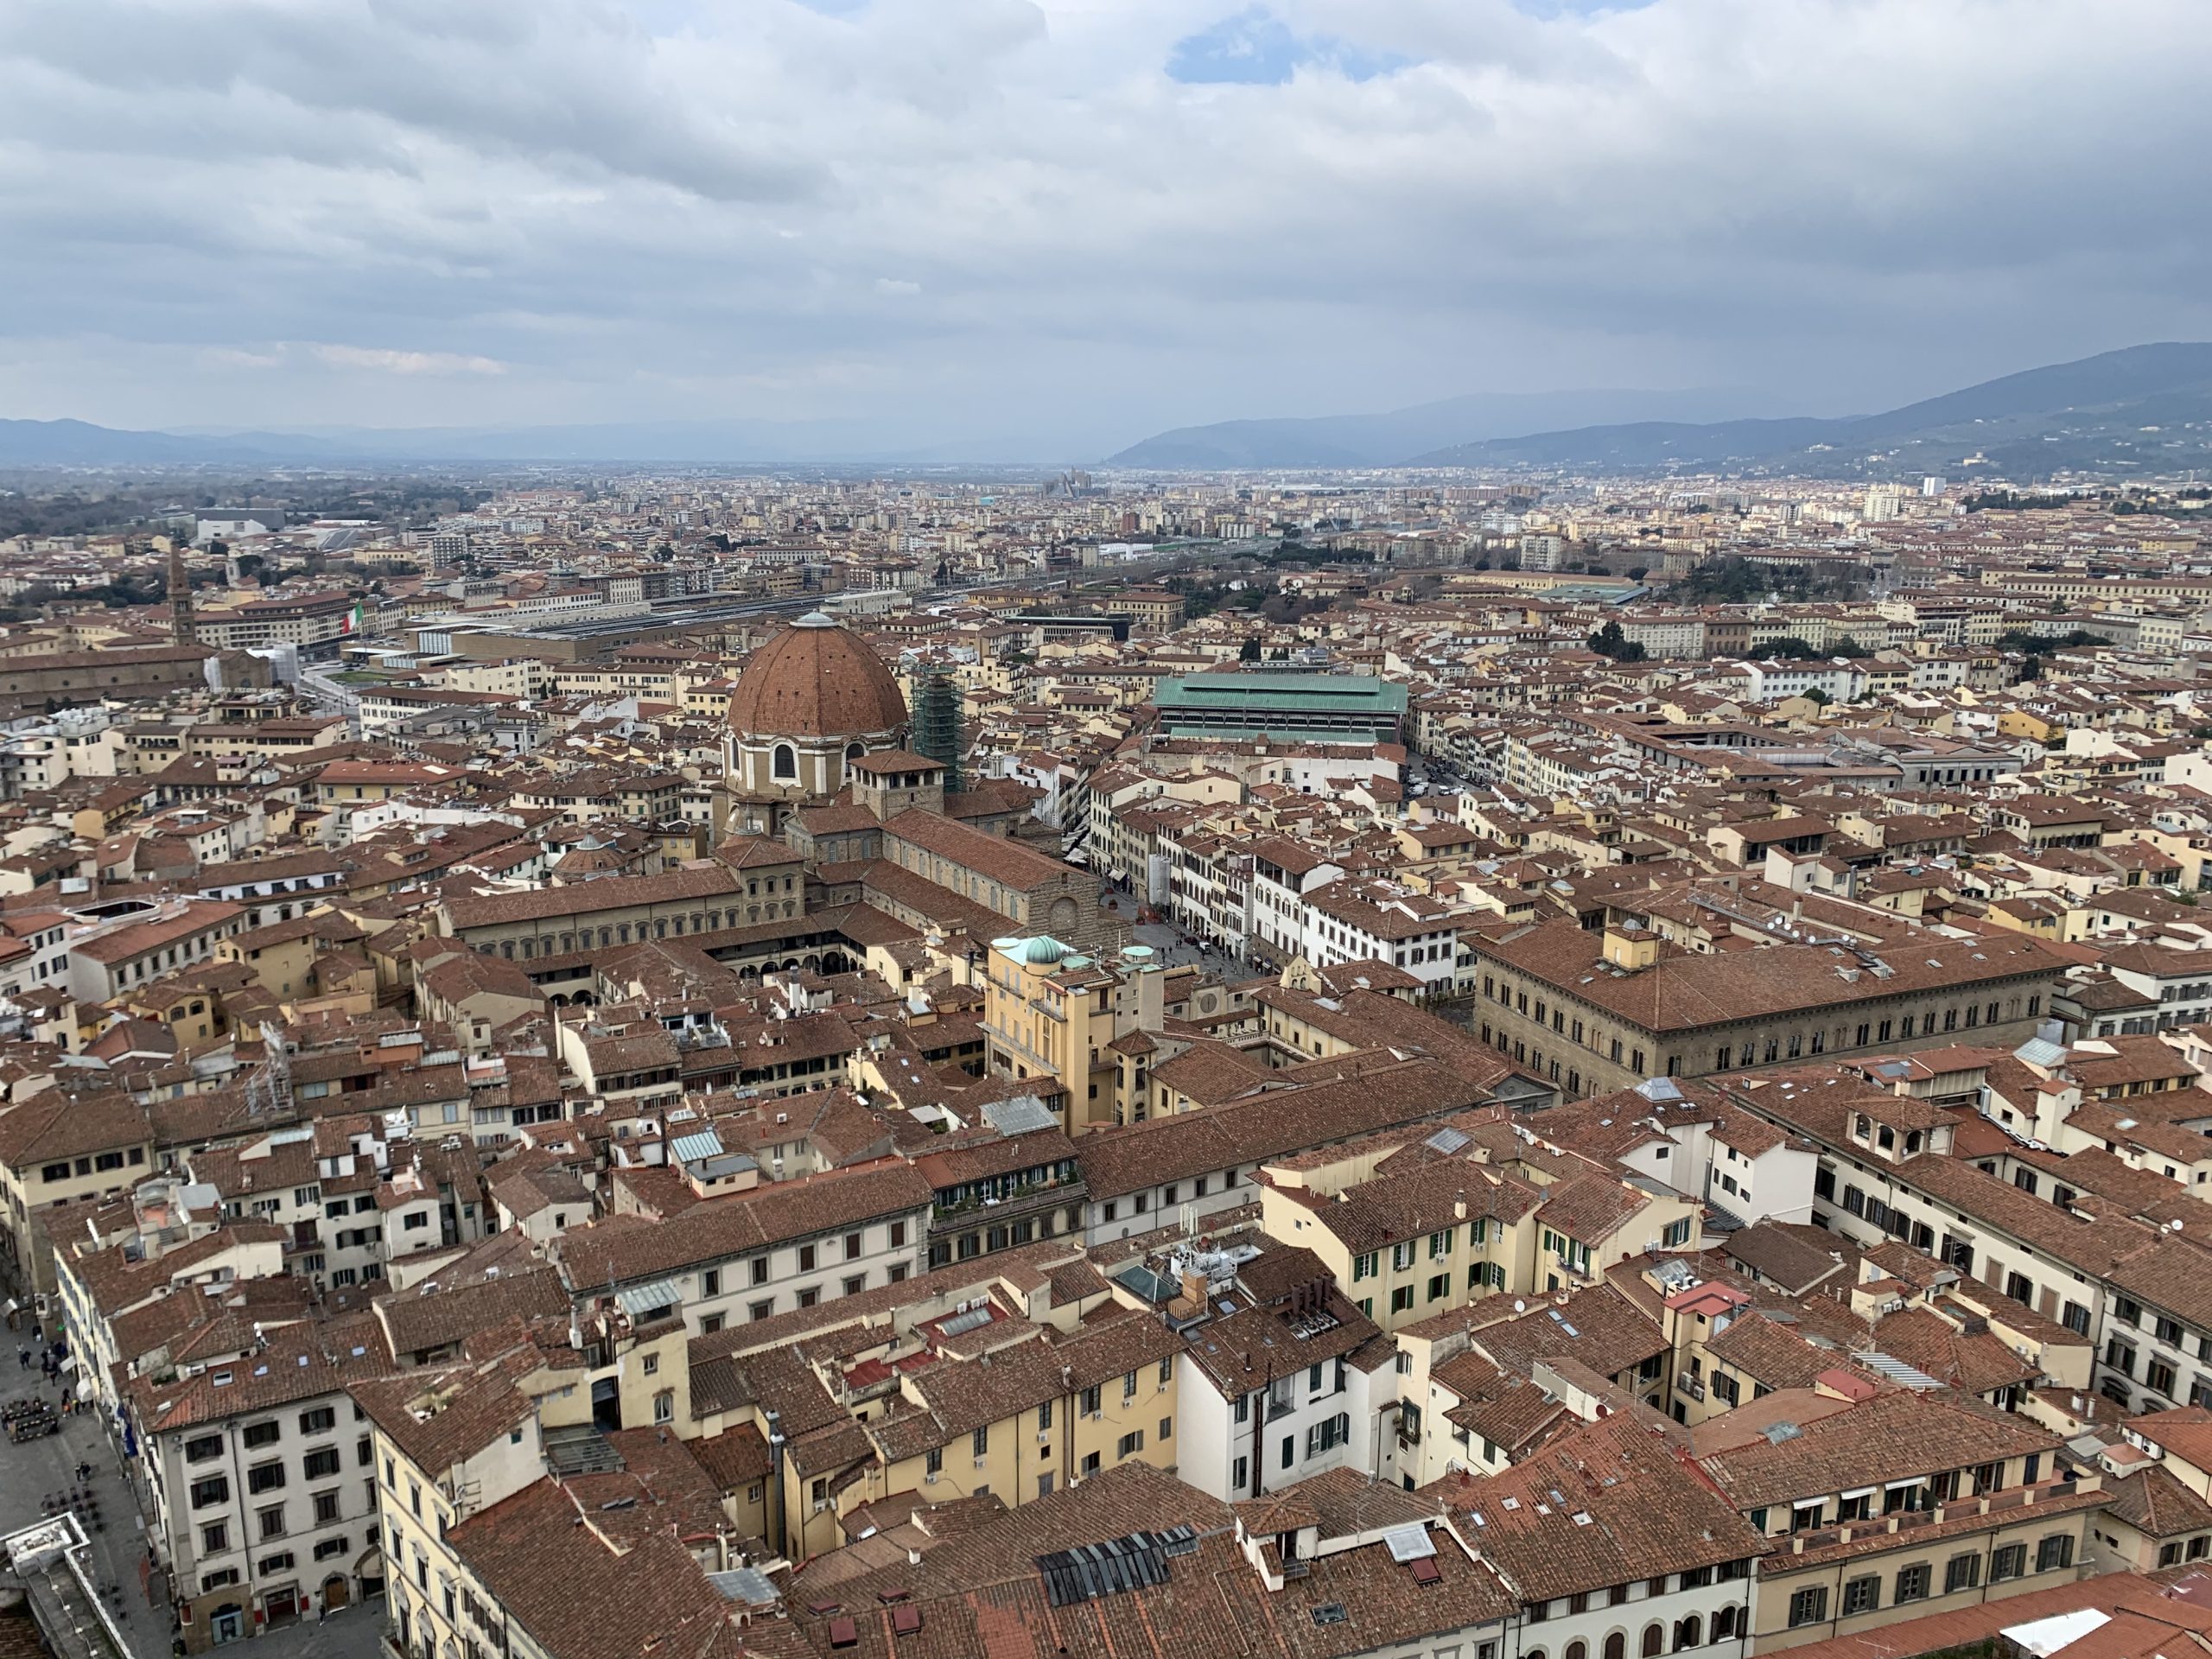 The most beautiful city view from the top of the Duomo